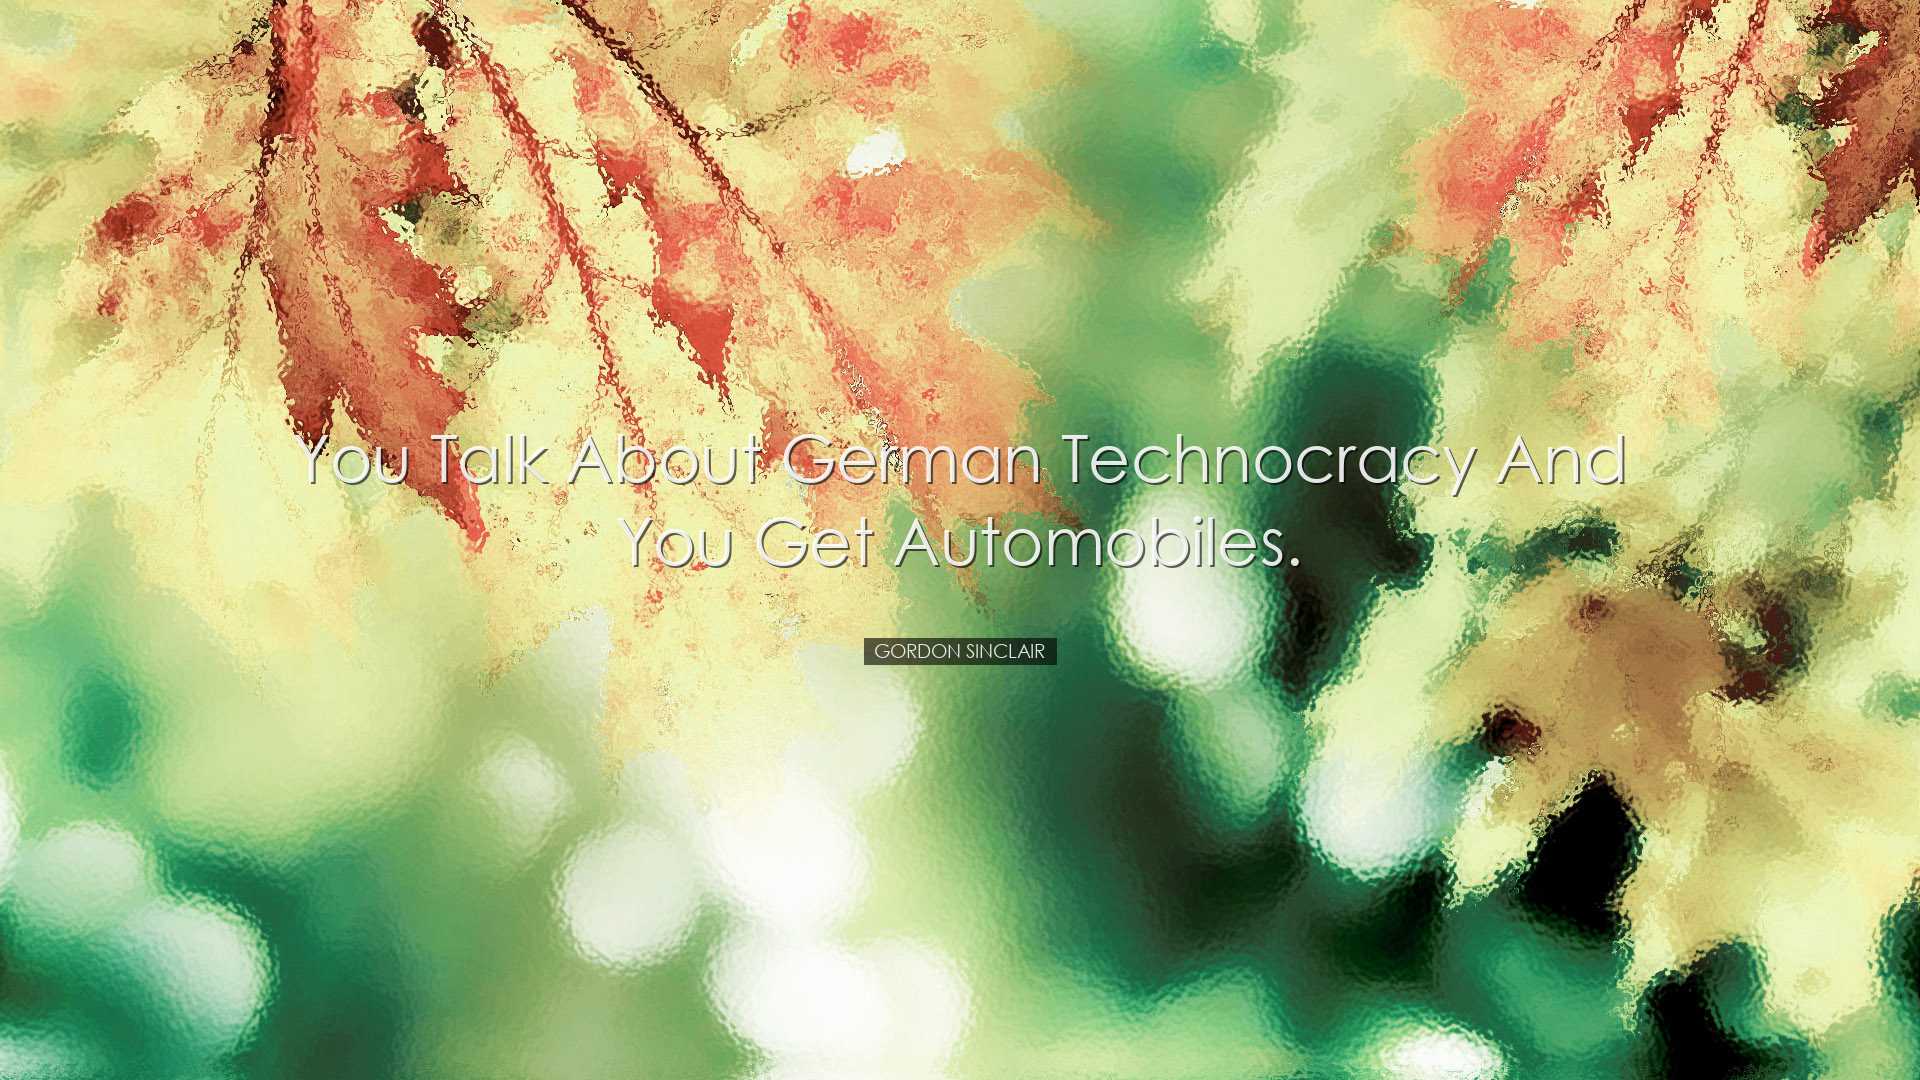 You talk about German technocracy and you get automobiles. - Gordo